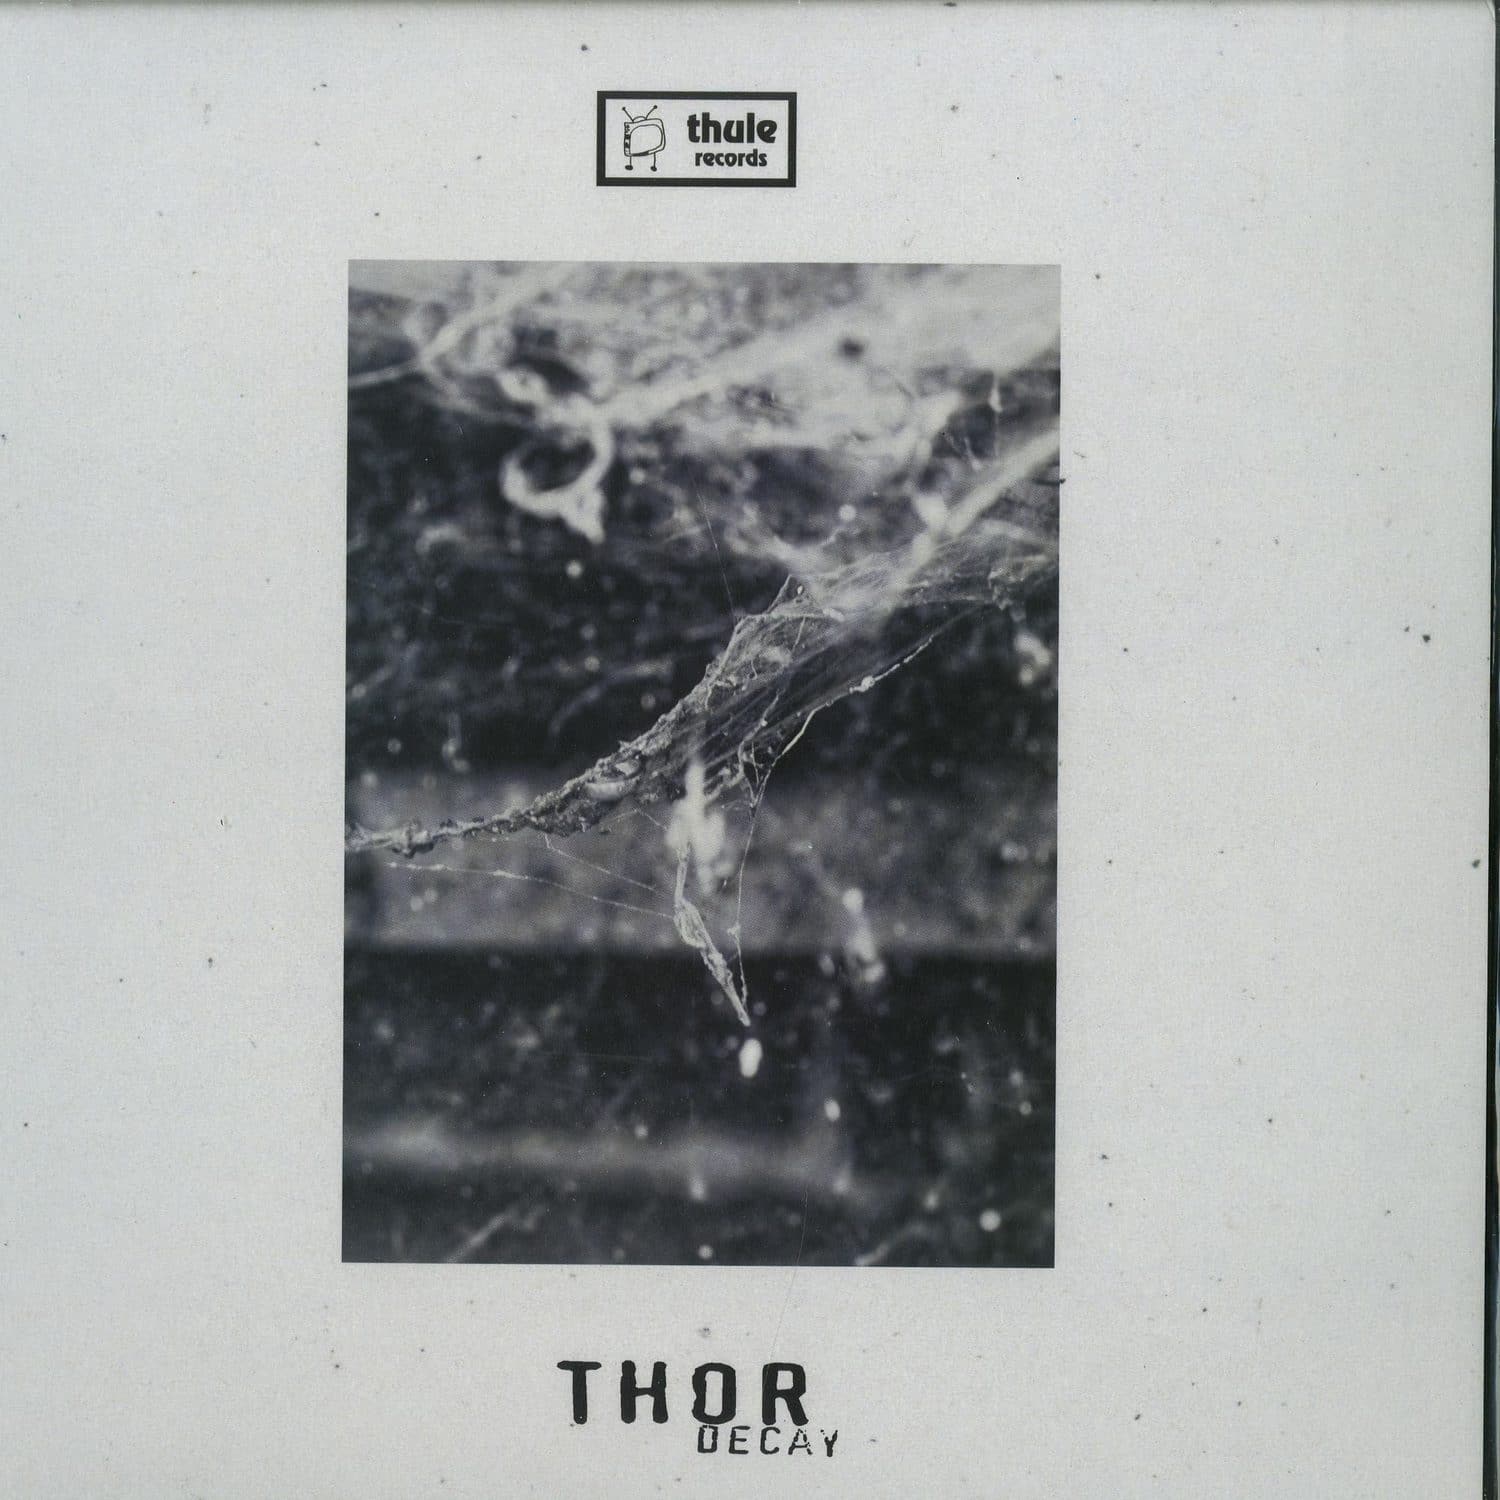 Thor - DECAY 